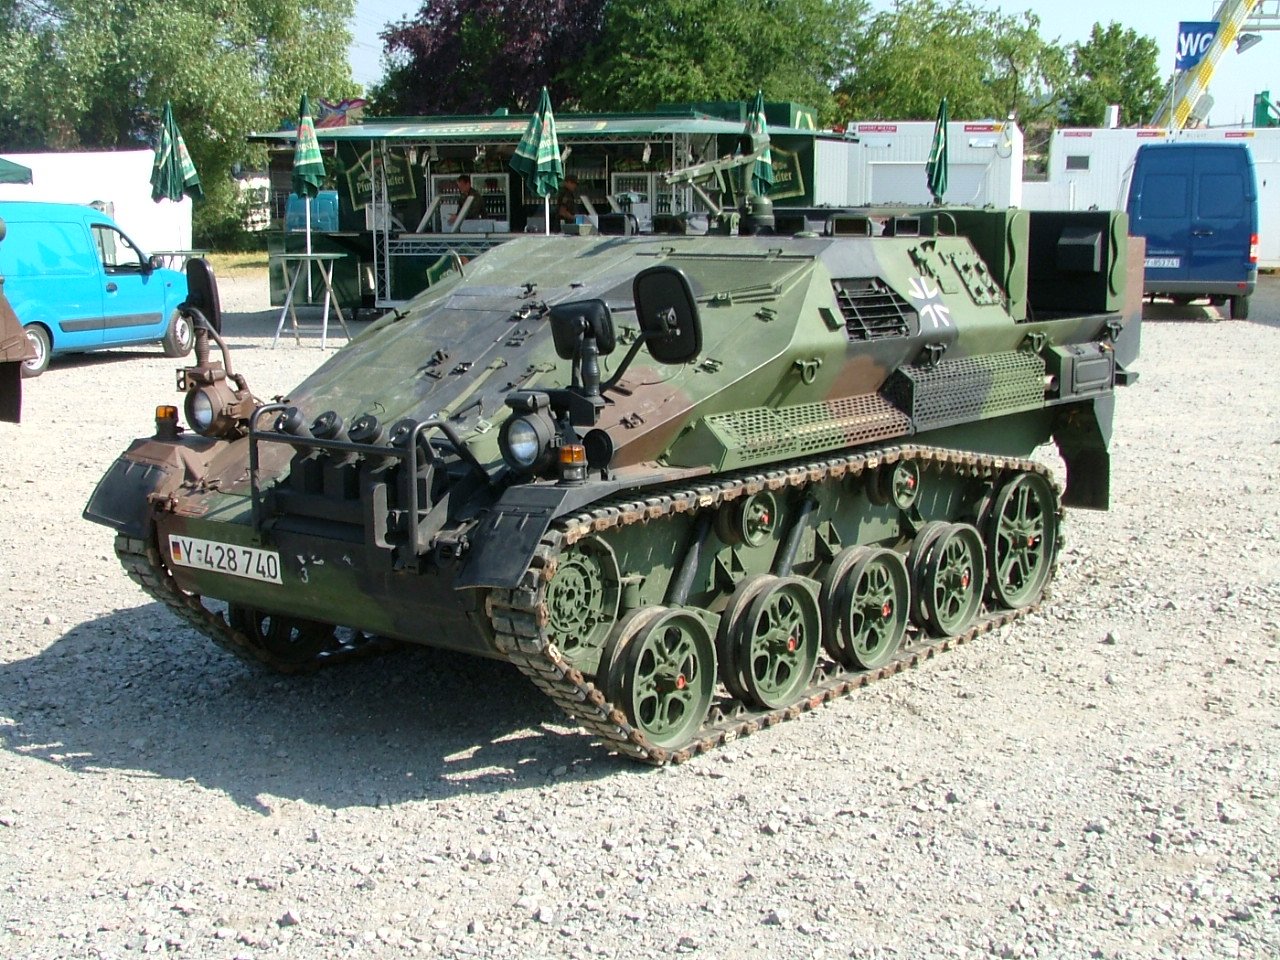 an army tank with all wheels on it